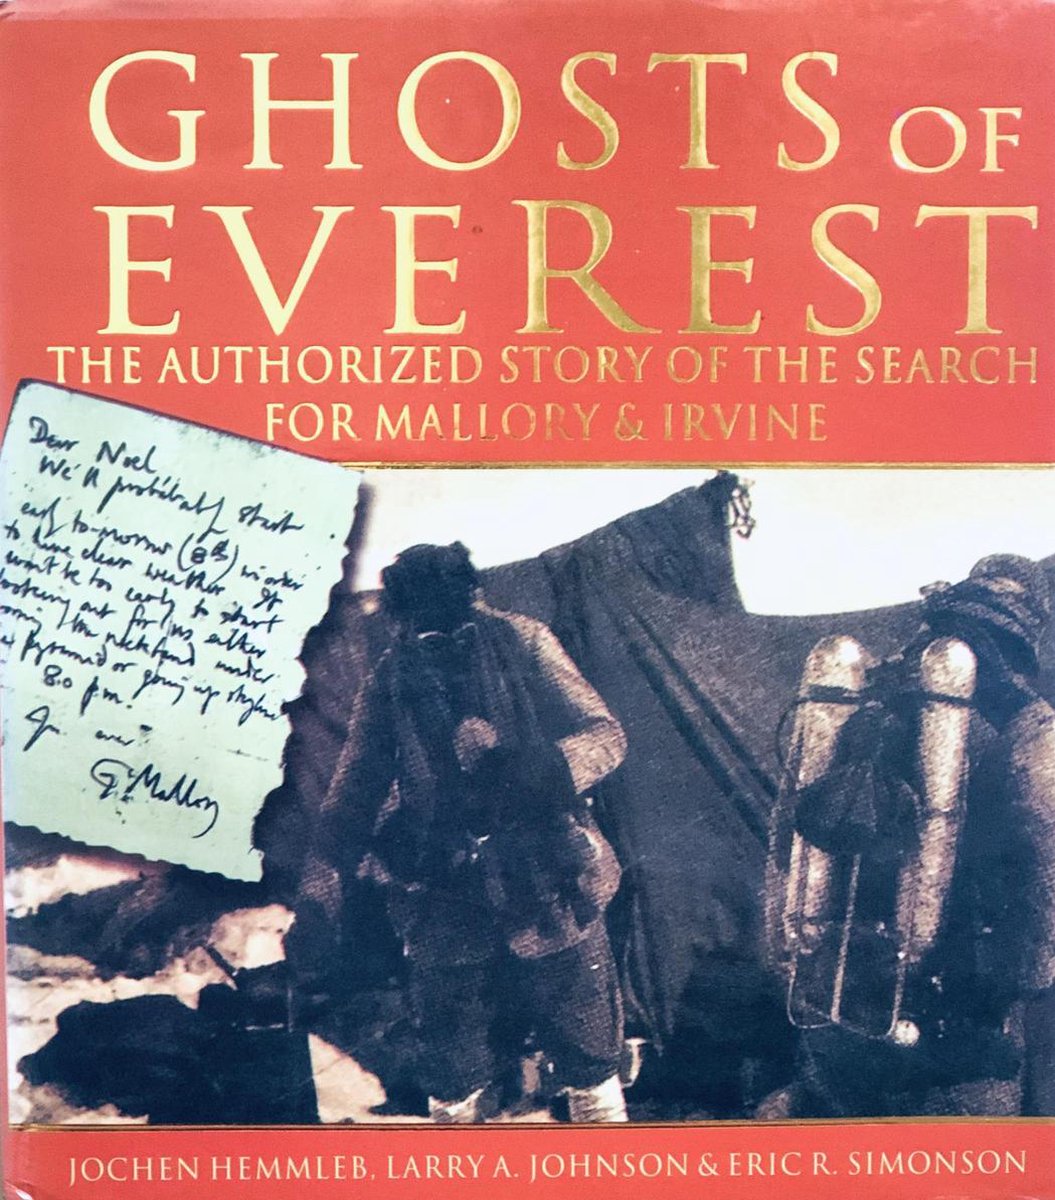 The Ghosts of Everest